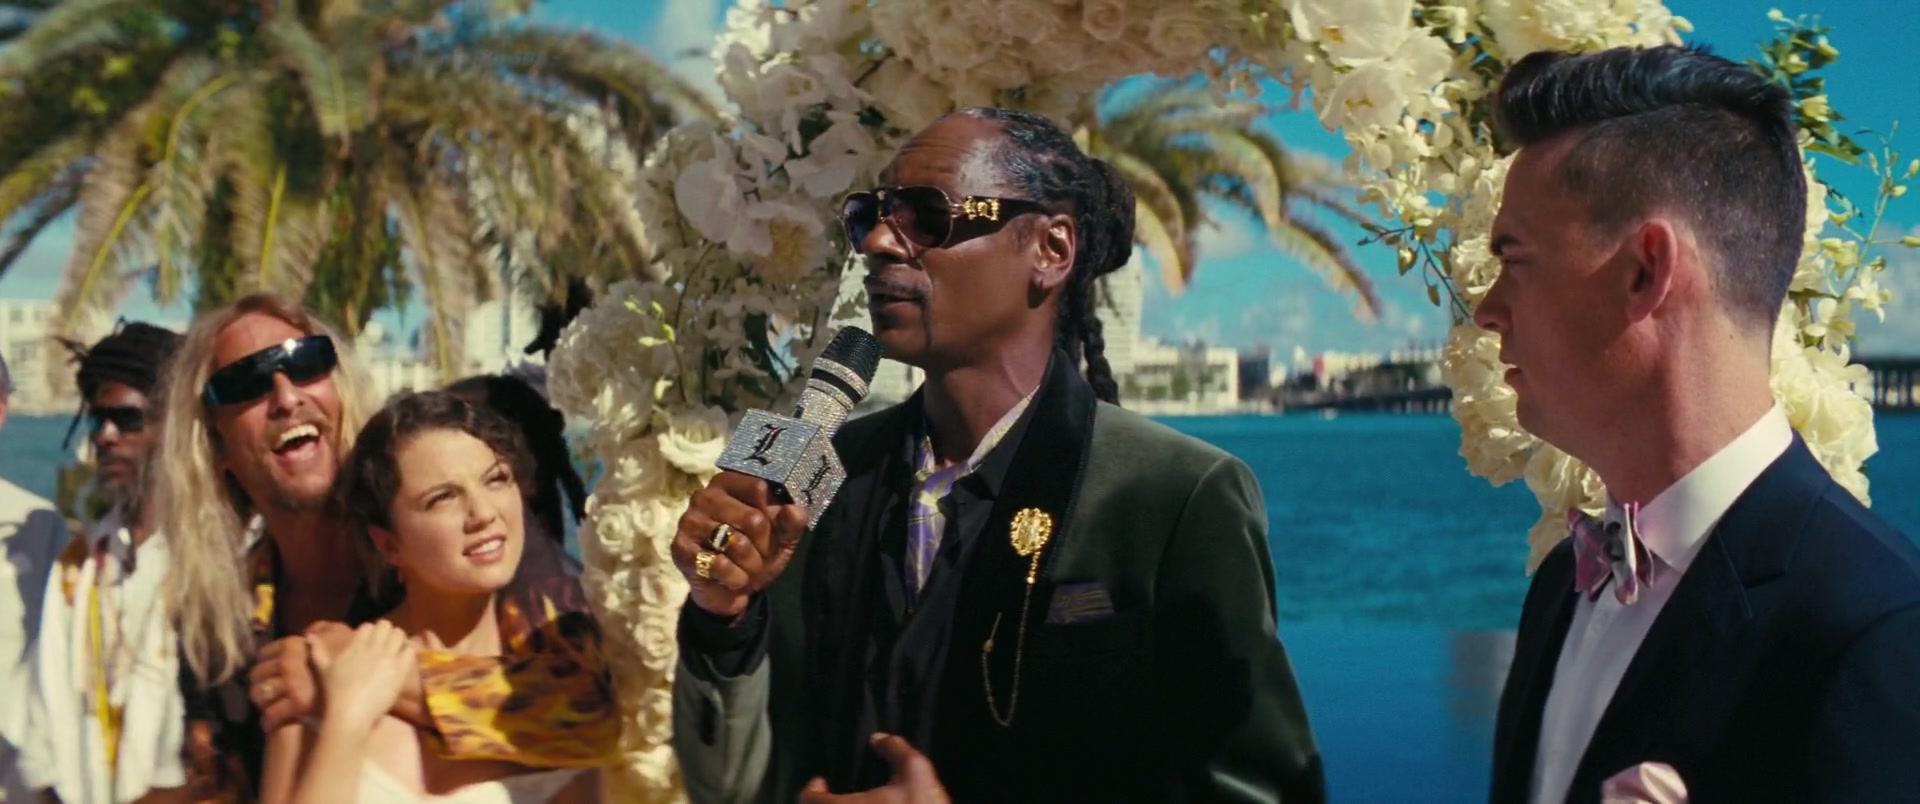 Versace Sunglasses With Medusa Logo Worn By Snoop Dogg In The Beach Bum ...